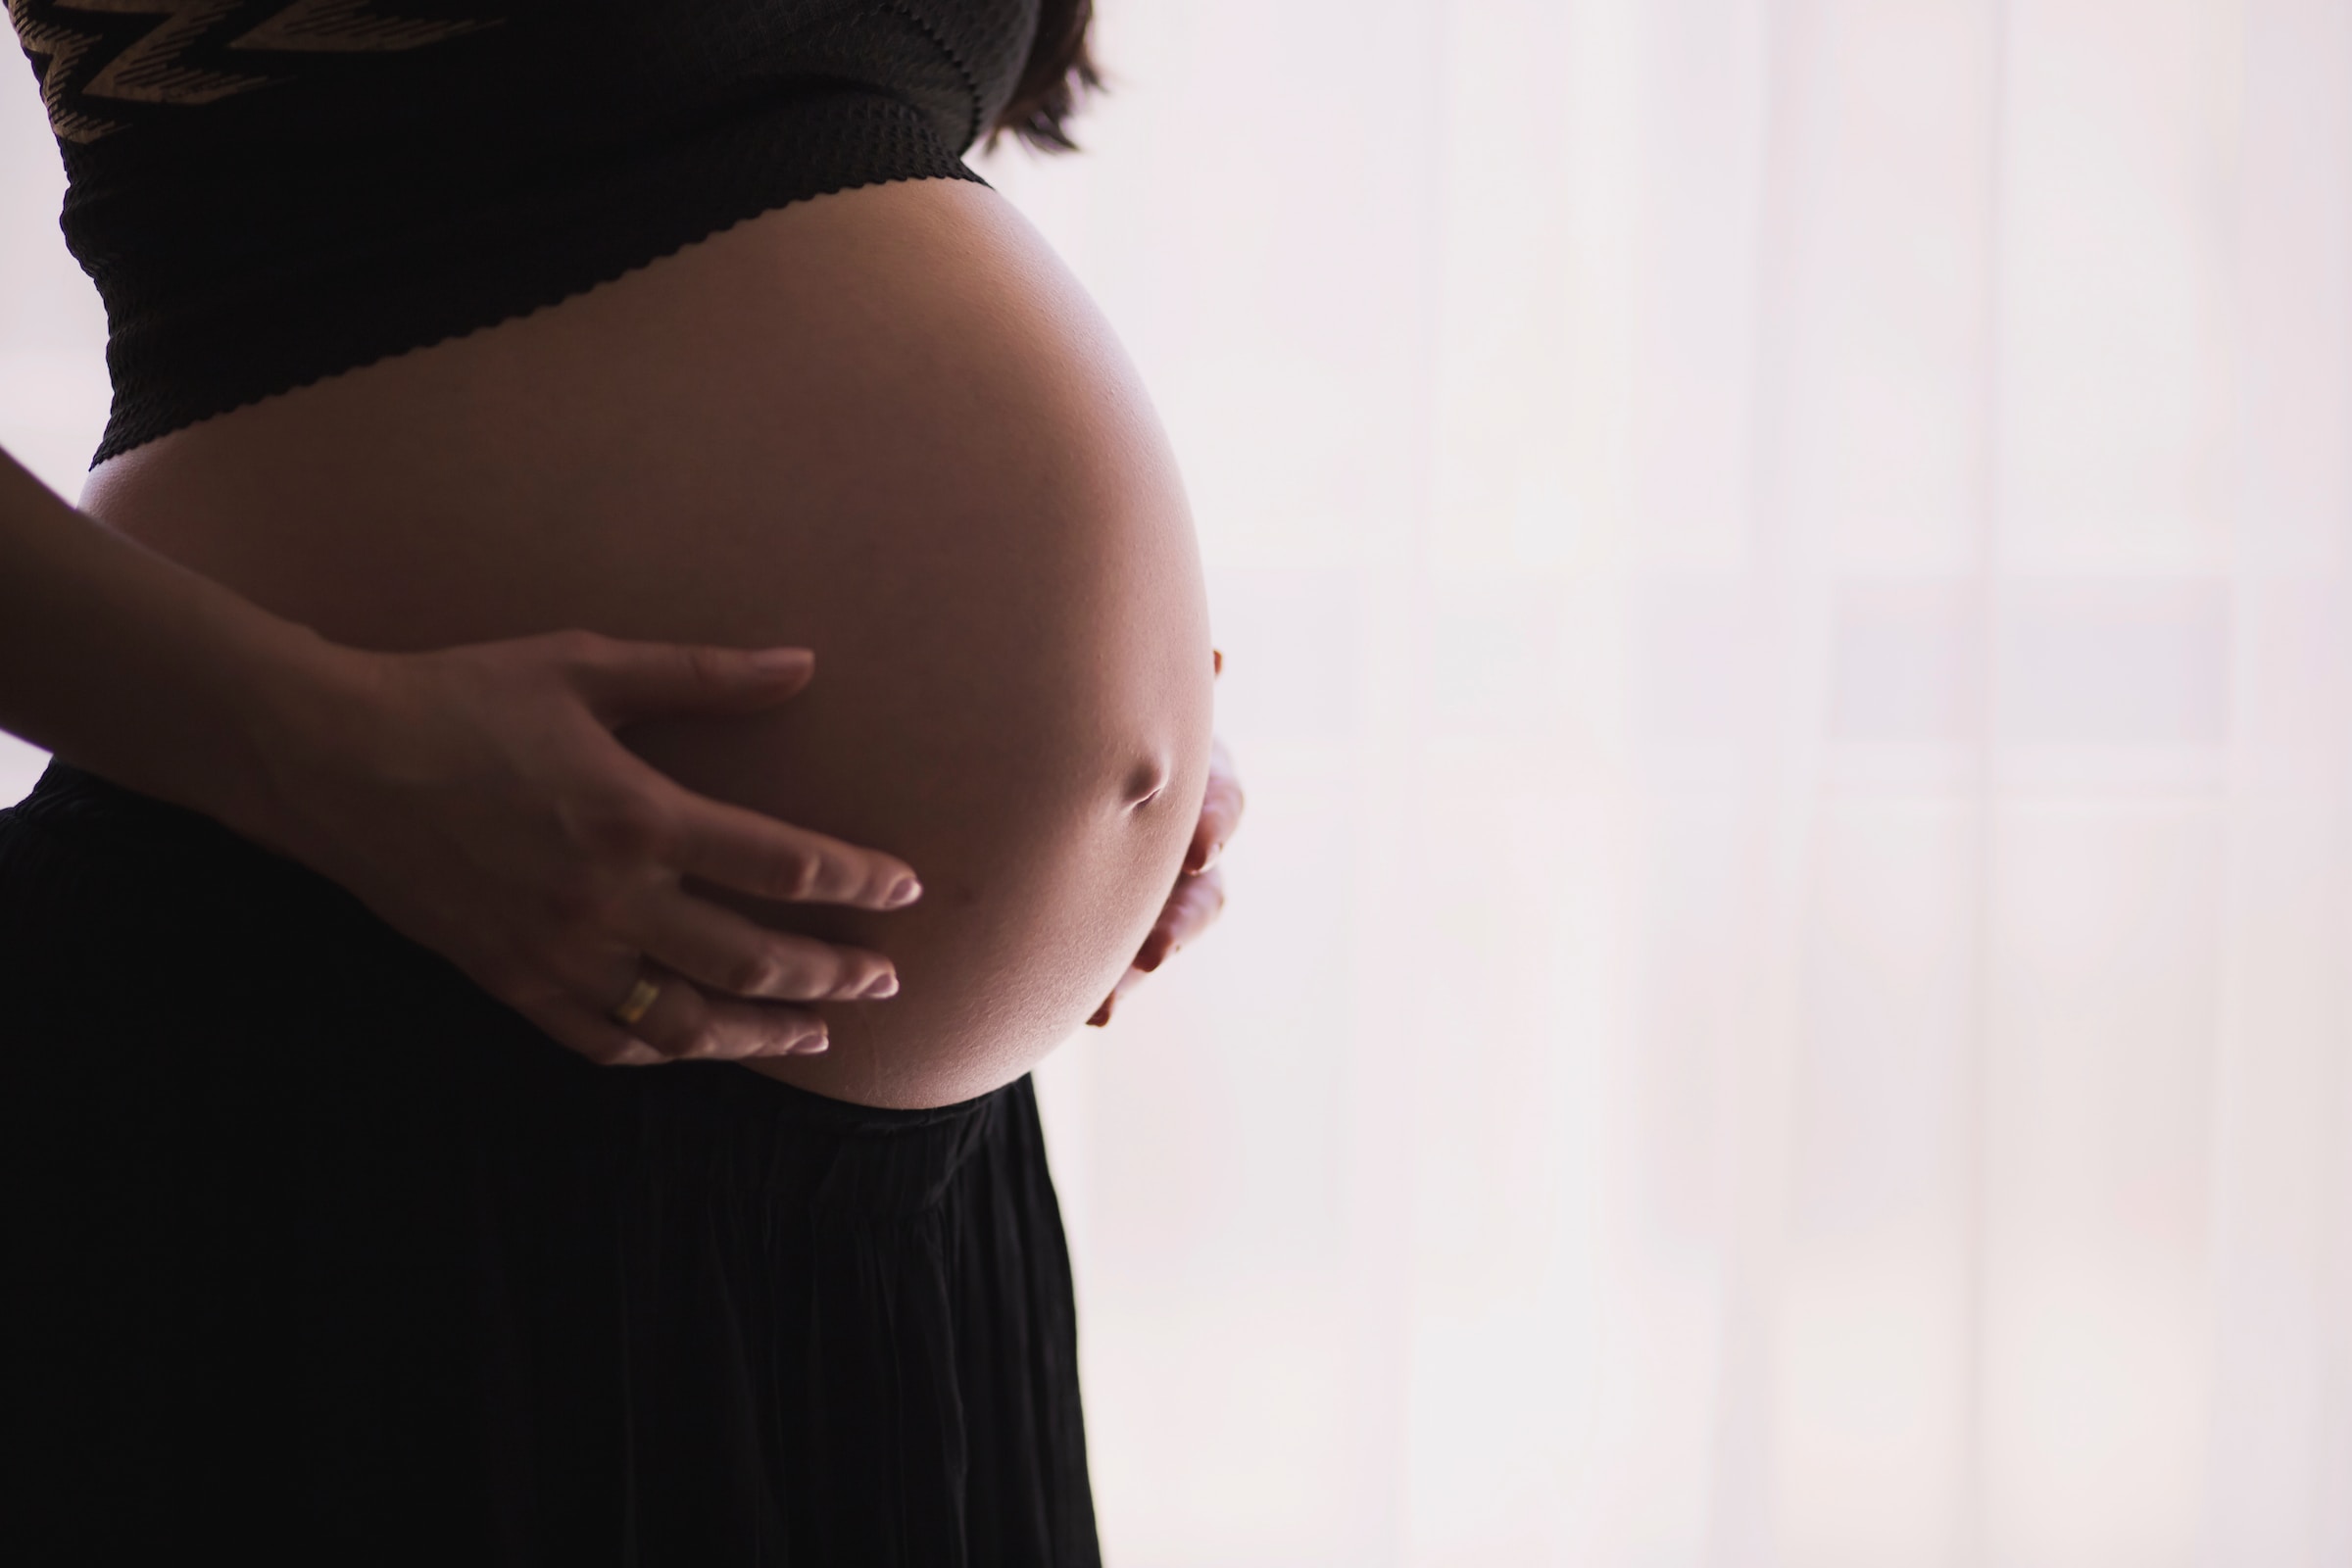 Pregnant woman holding her belly | Source: Unsplash